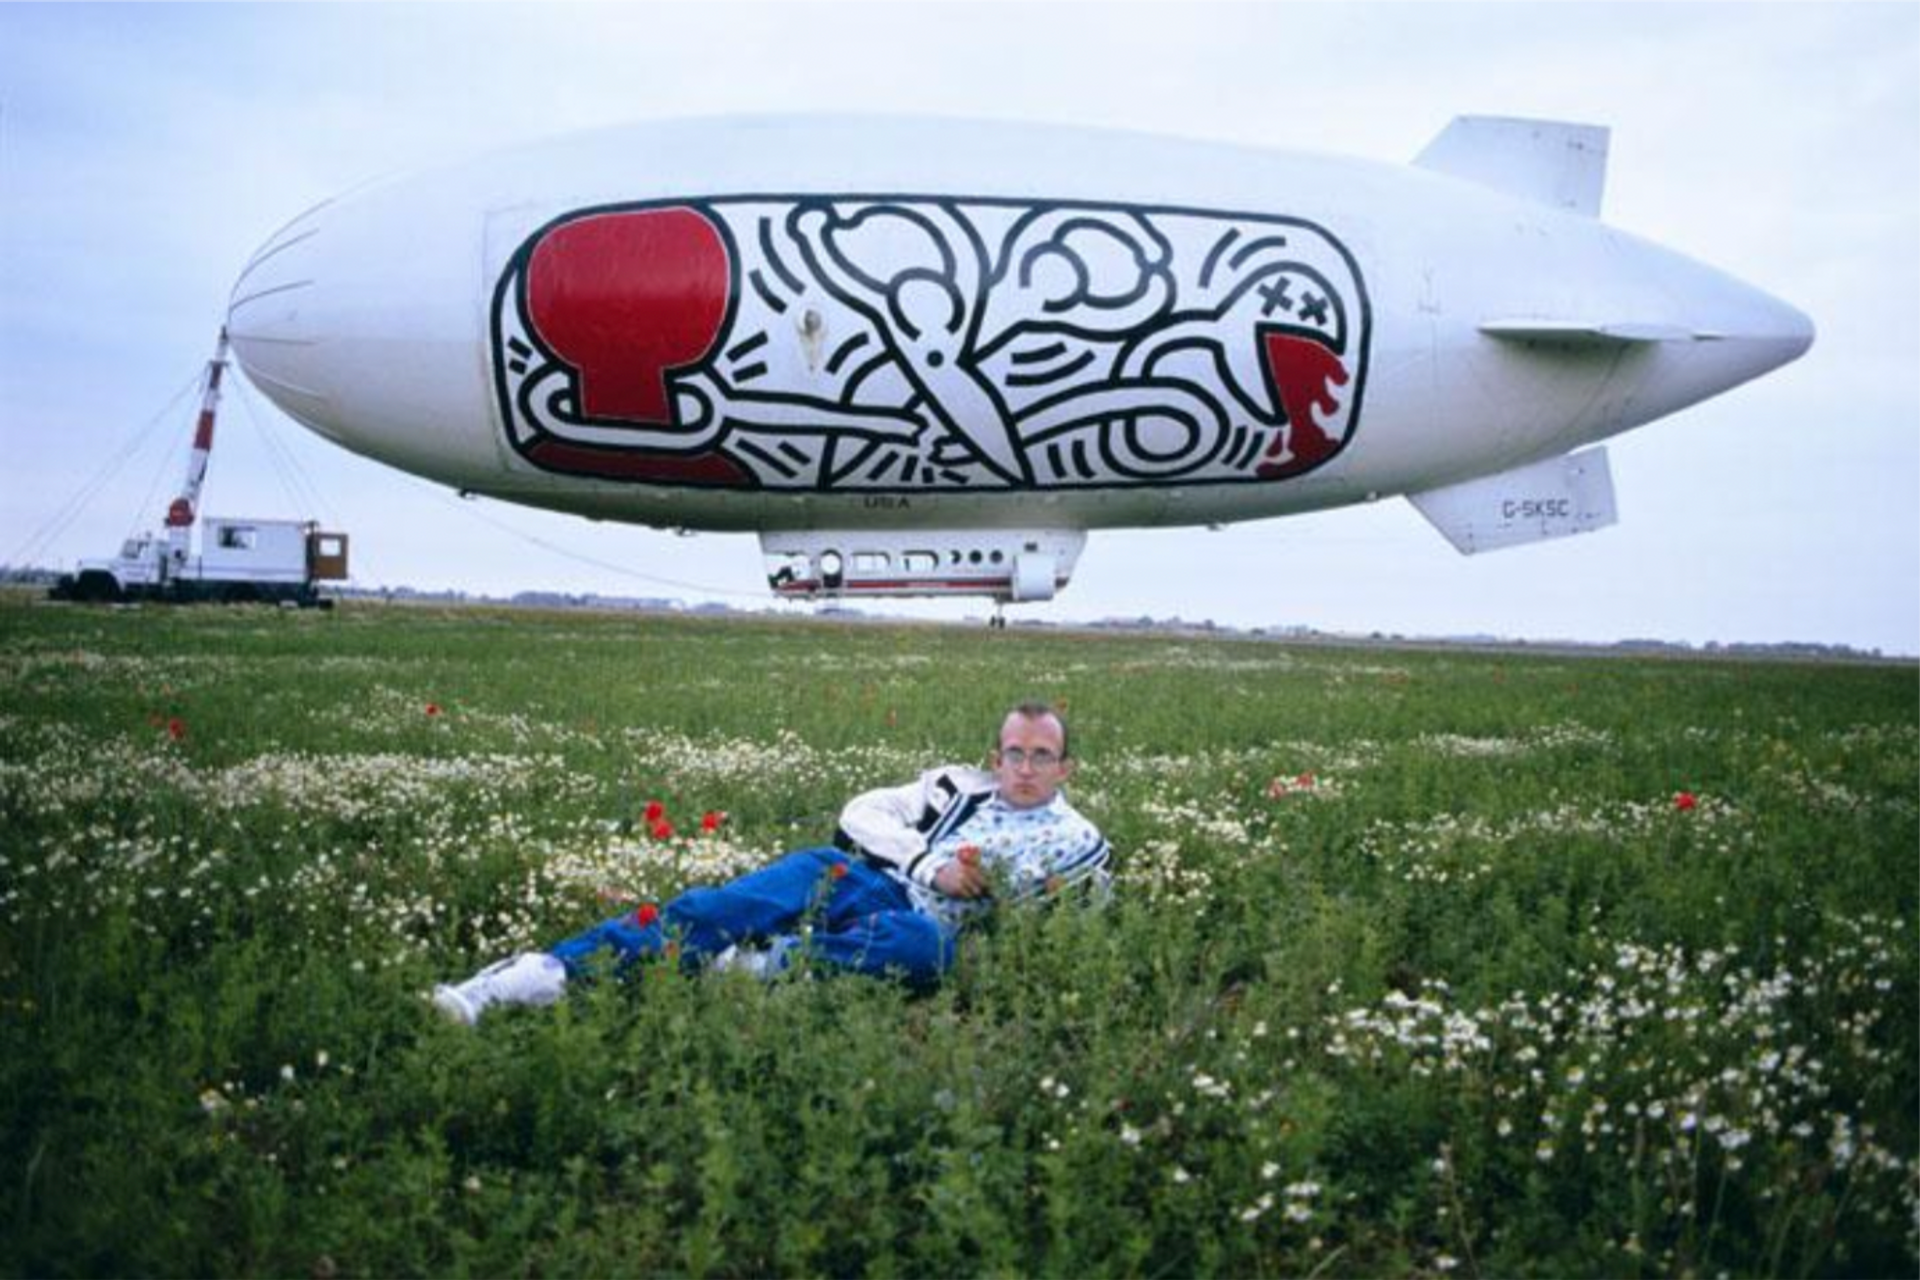 Keith Haring laying on a field of grass with a blimp designed with his artwork behind him in France.